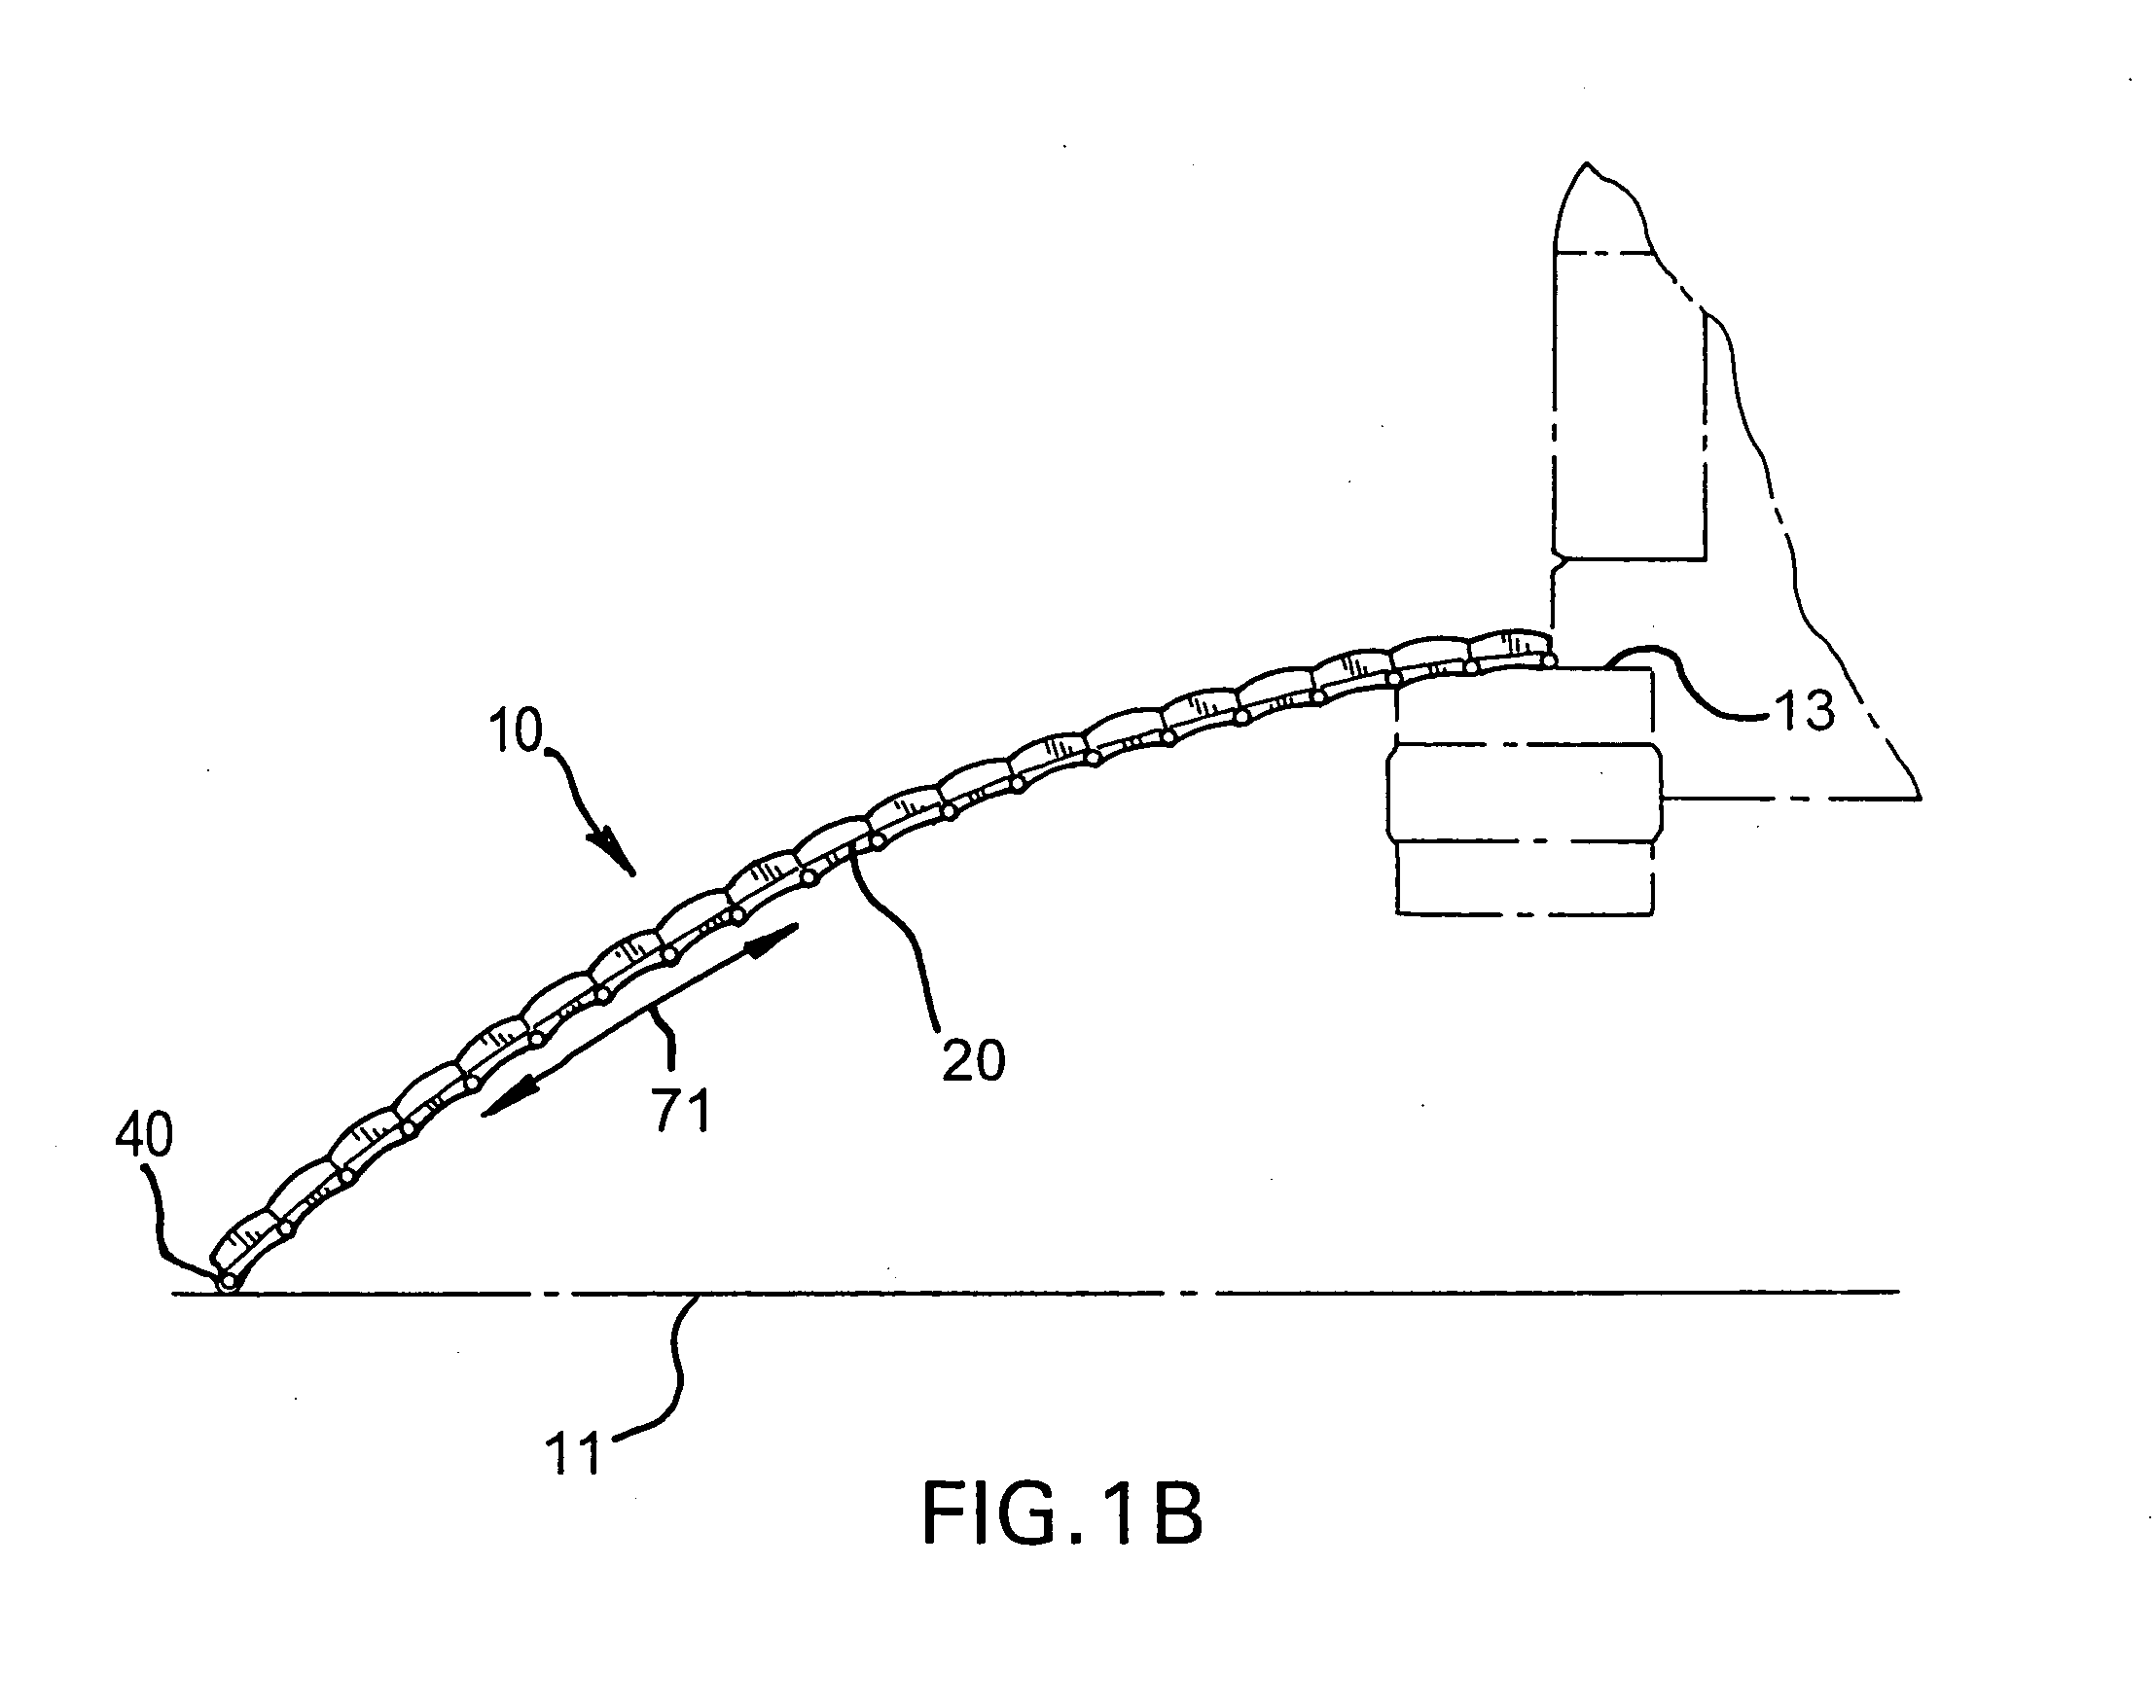 Multi-segmented deployable arched ramp